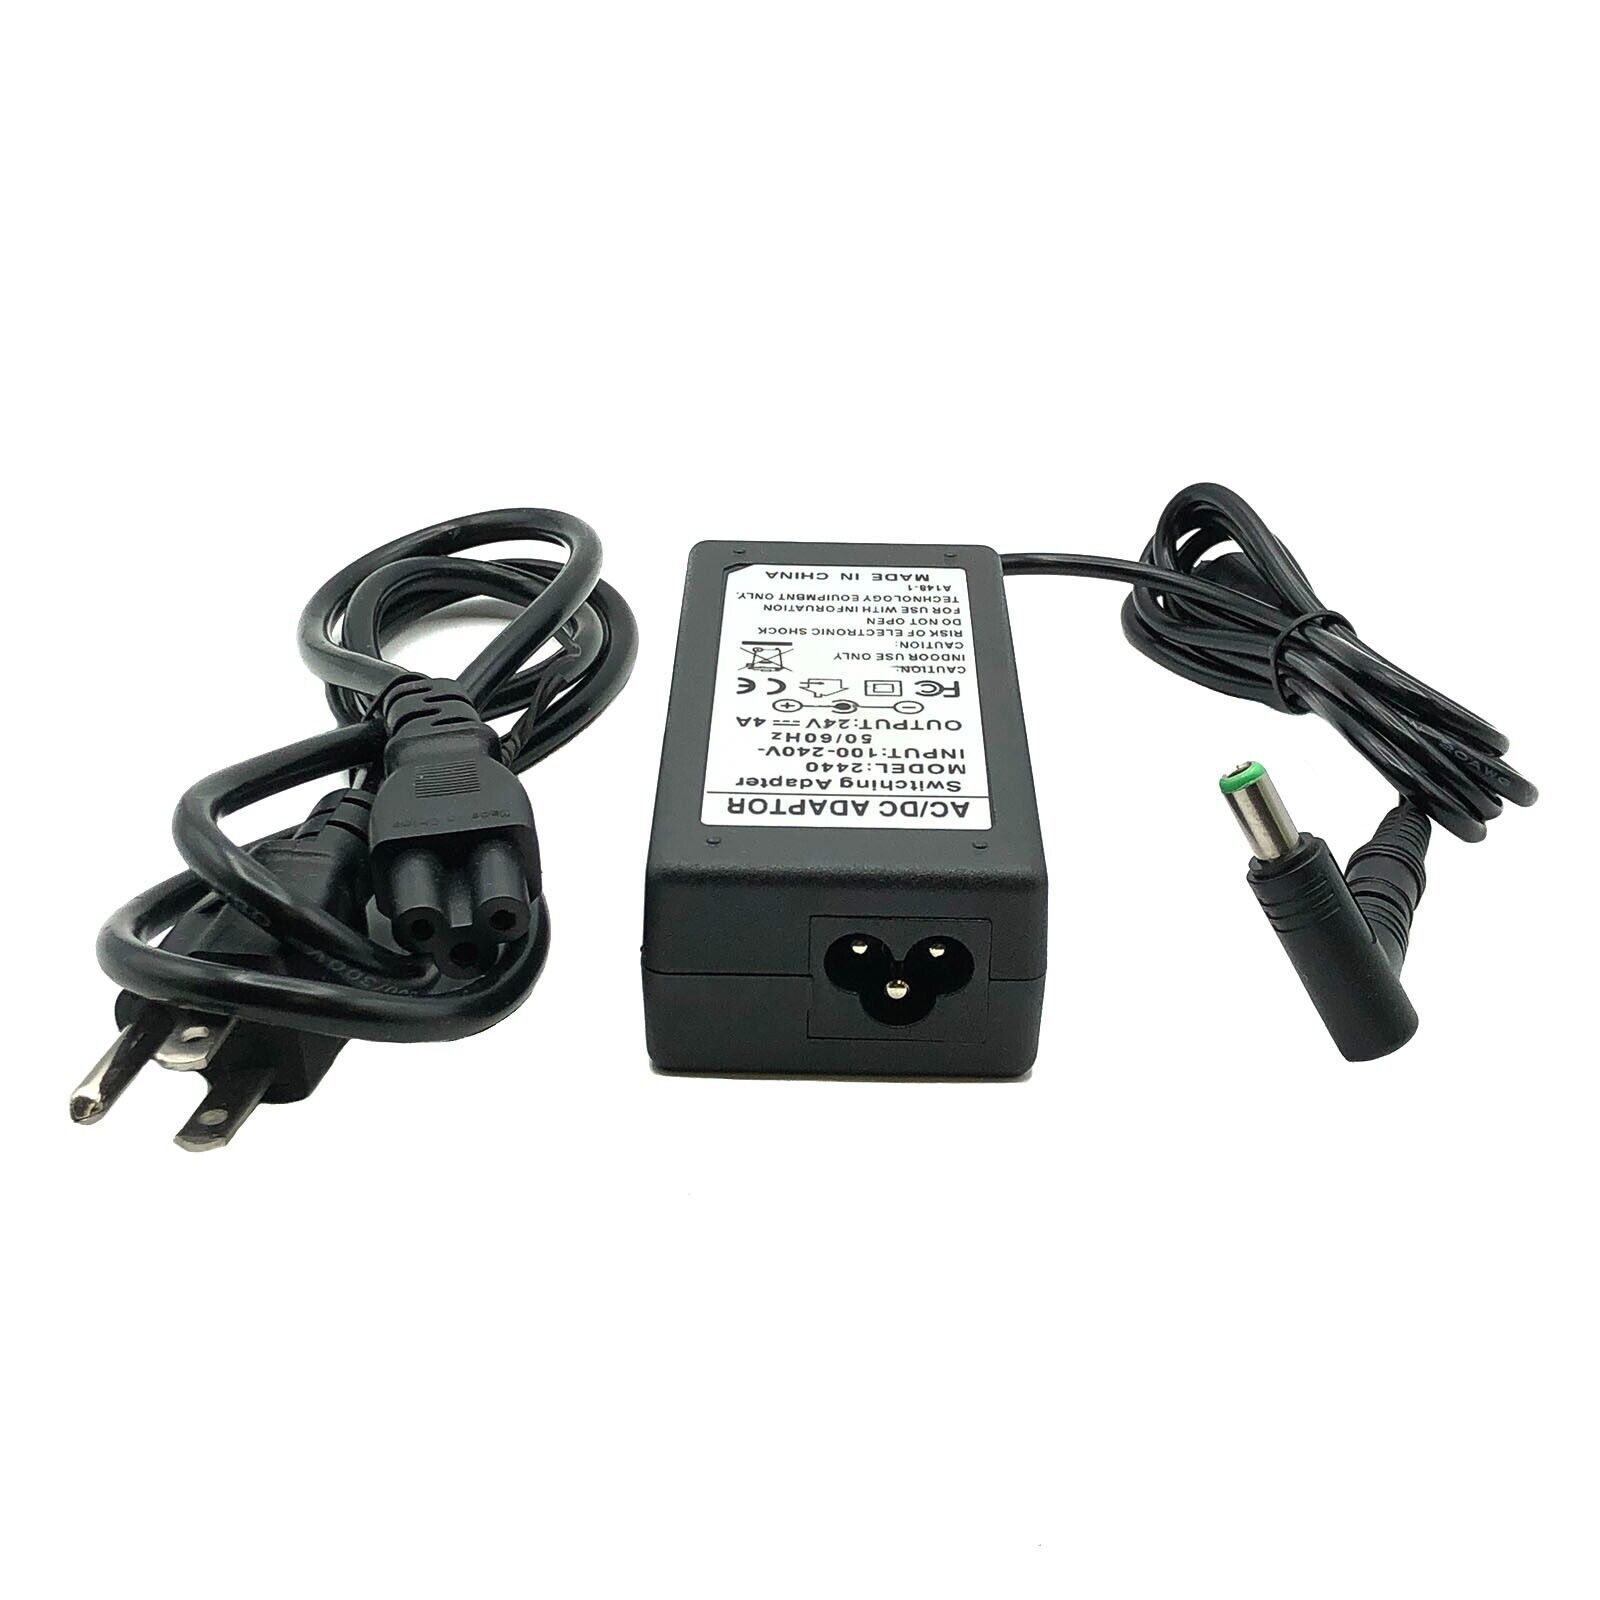 New 24V 4A AC DC Adapter for Zebra GX420t GX430t ZP450 GT800 GT810 Power Supply Compatible Brand: Zebra Connection S